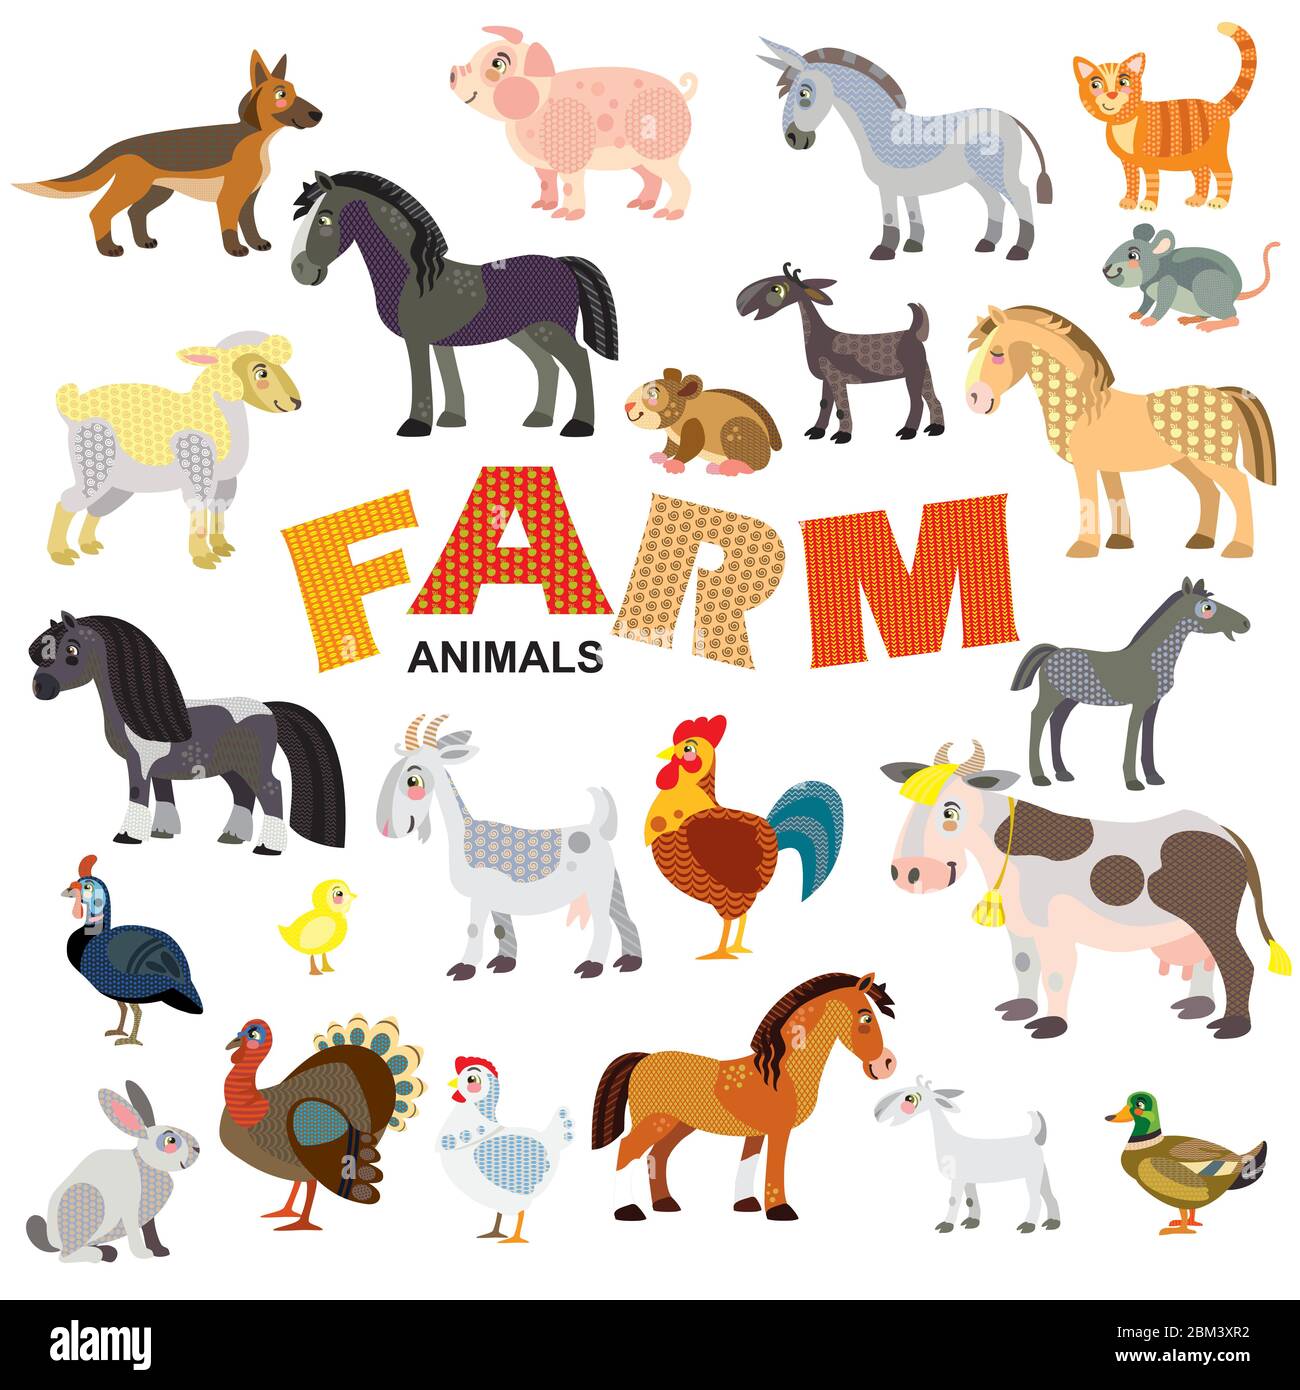 Farm animals in front view and side view large vector cartoon set in flat style isolated on white background. Vector illustration of animals for child Stock Vector